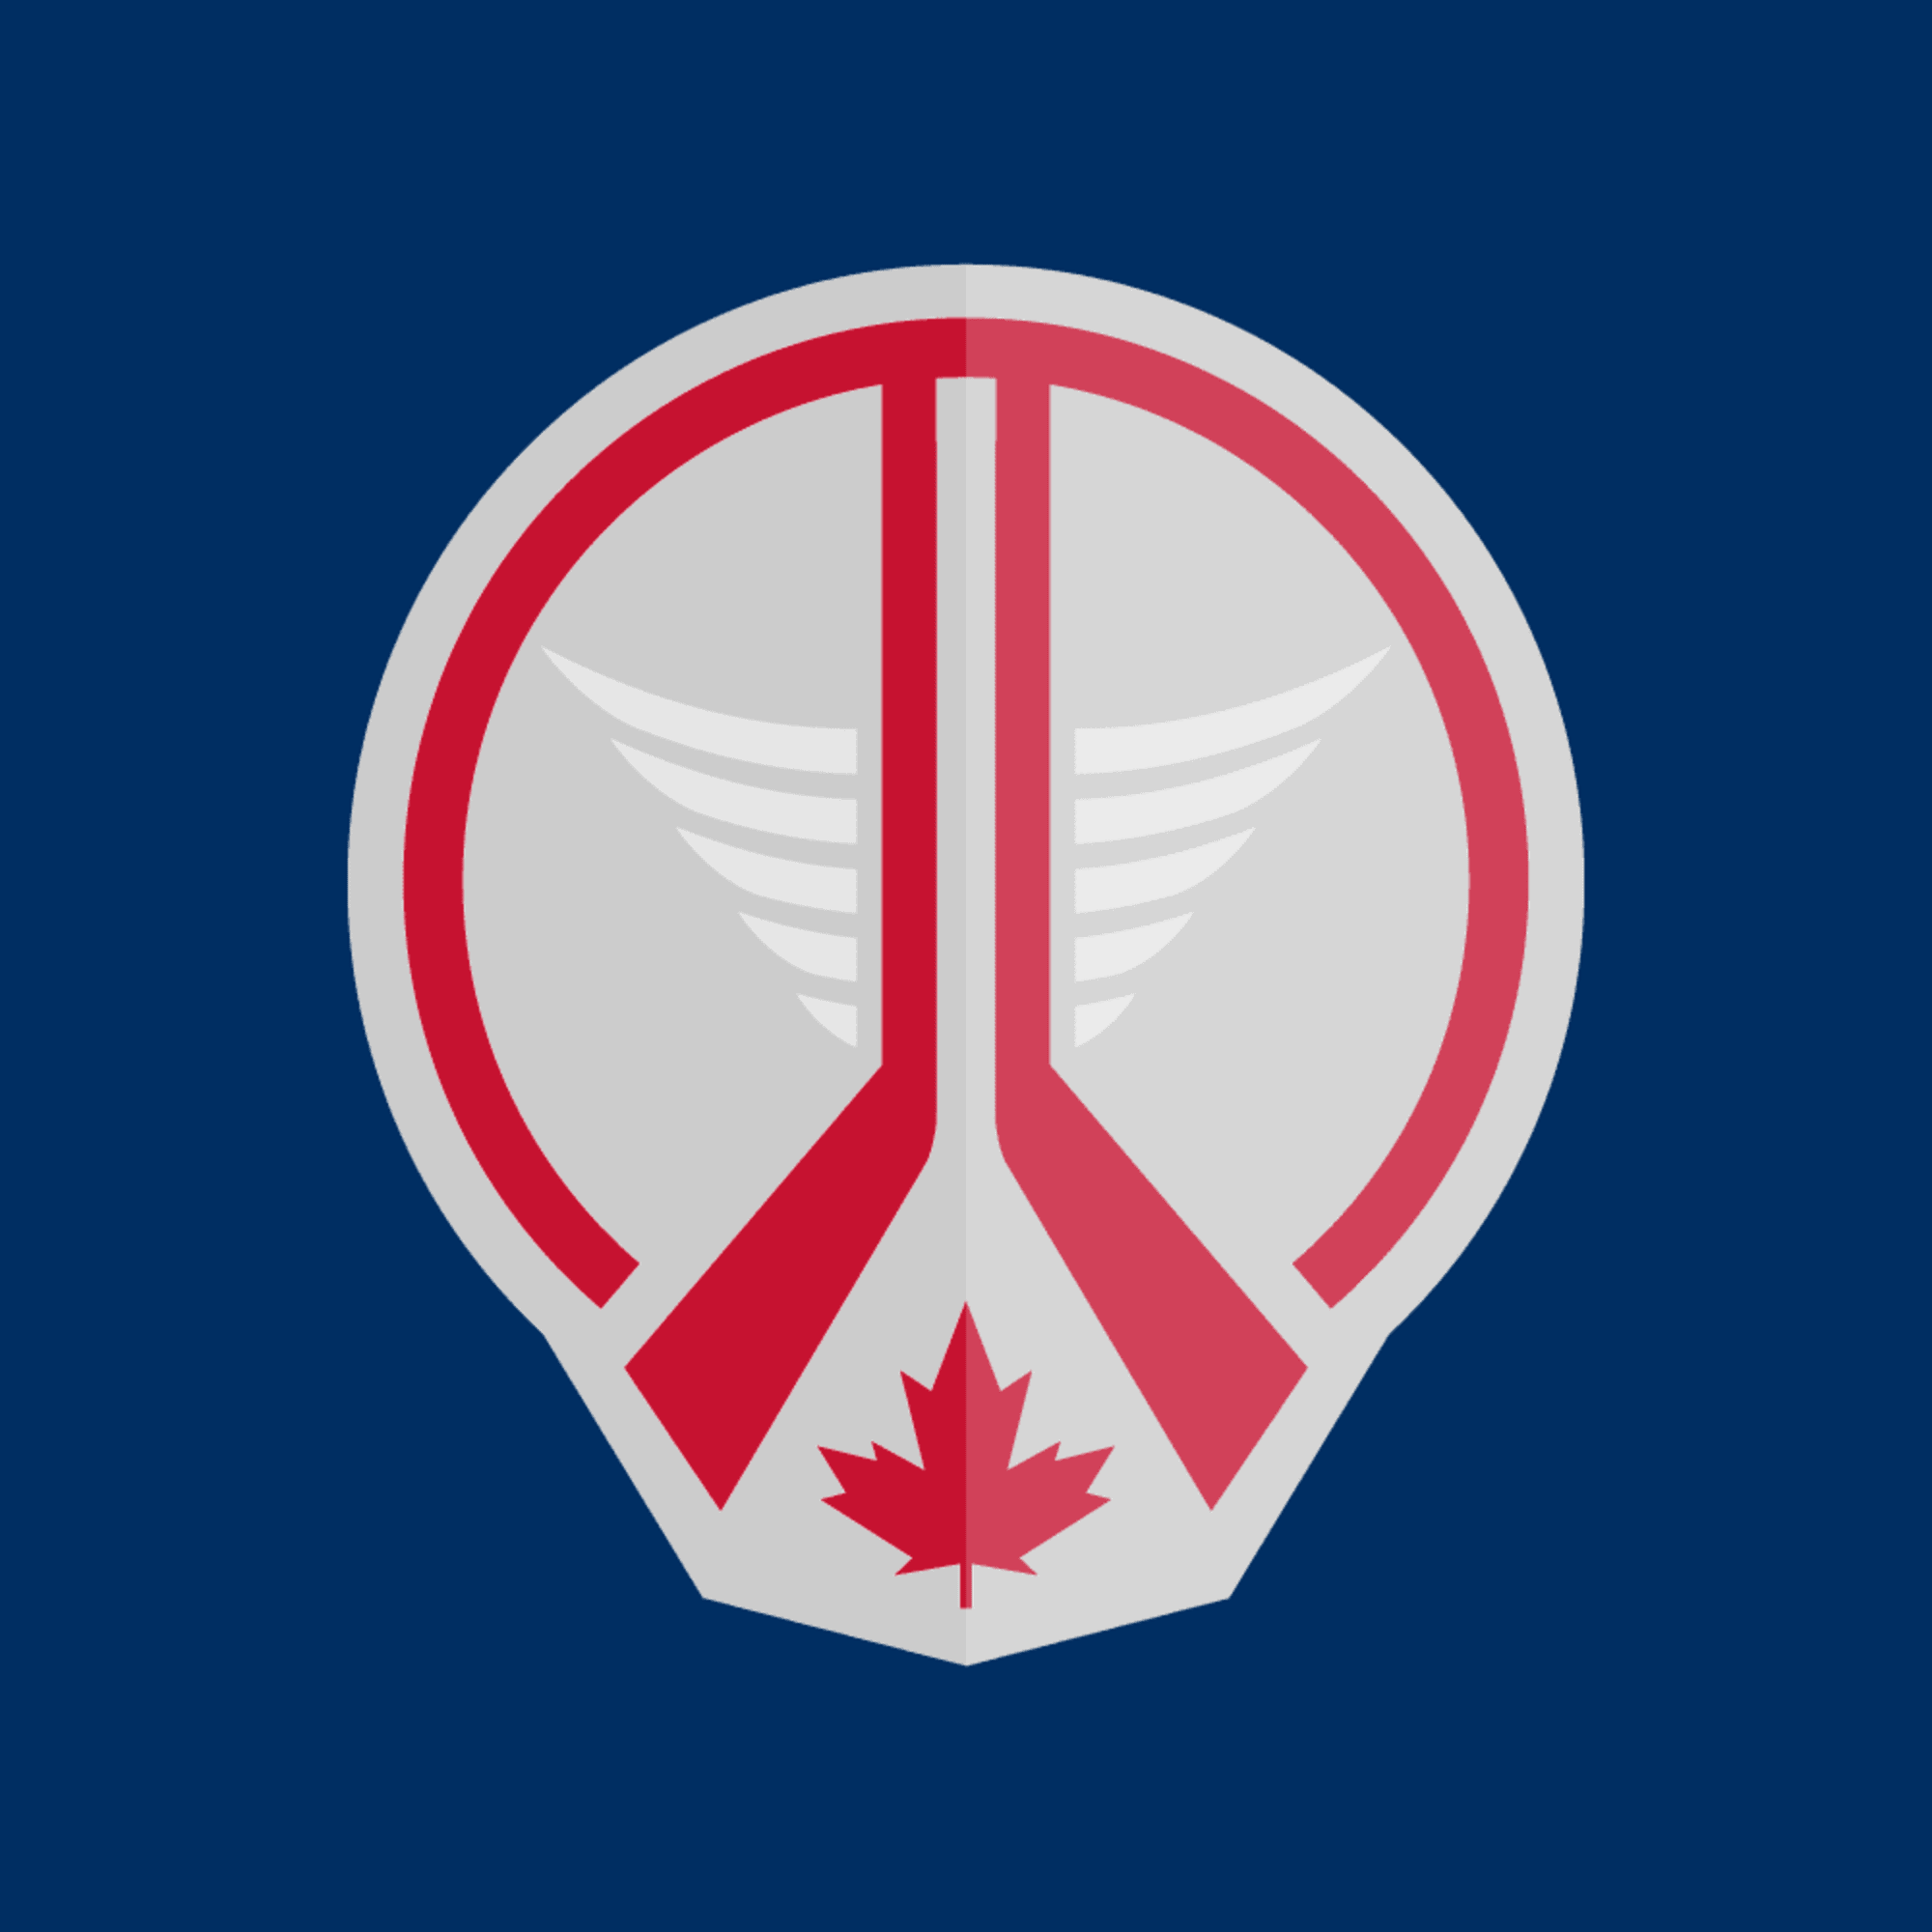 Winnipeg Jets - “I love it. They have great colours, the